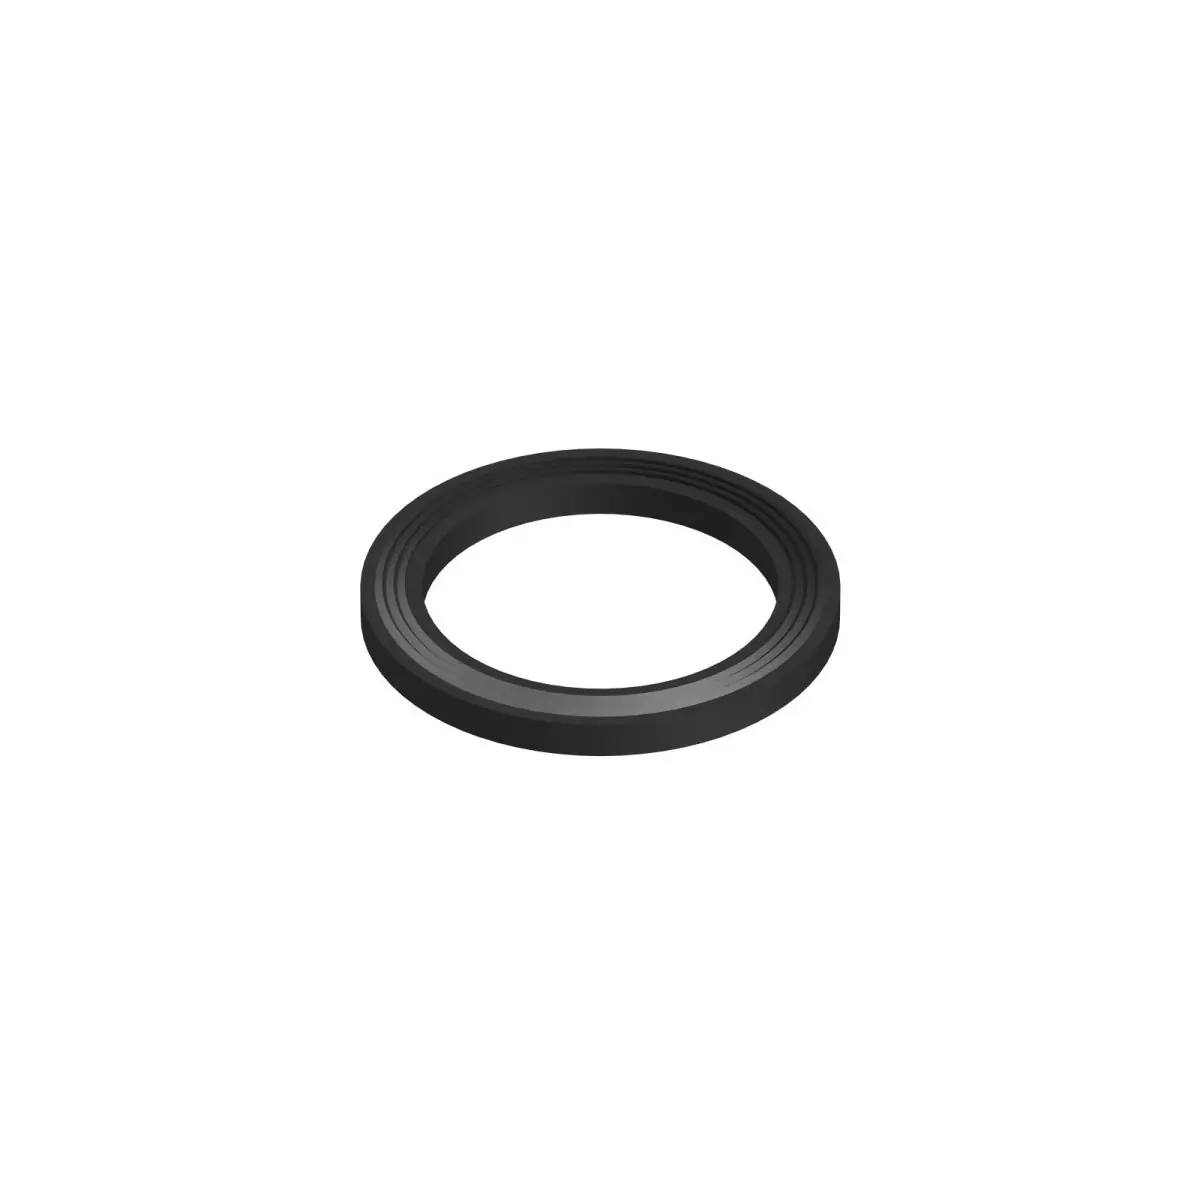 Black camlock gasket 2 inches